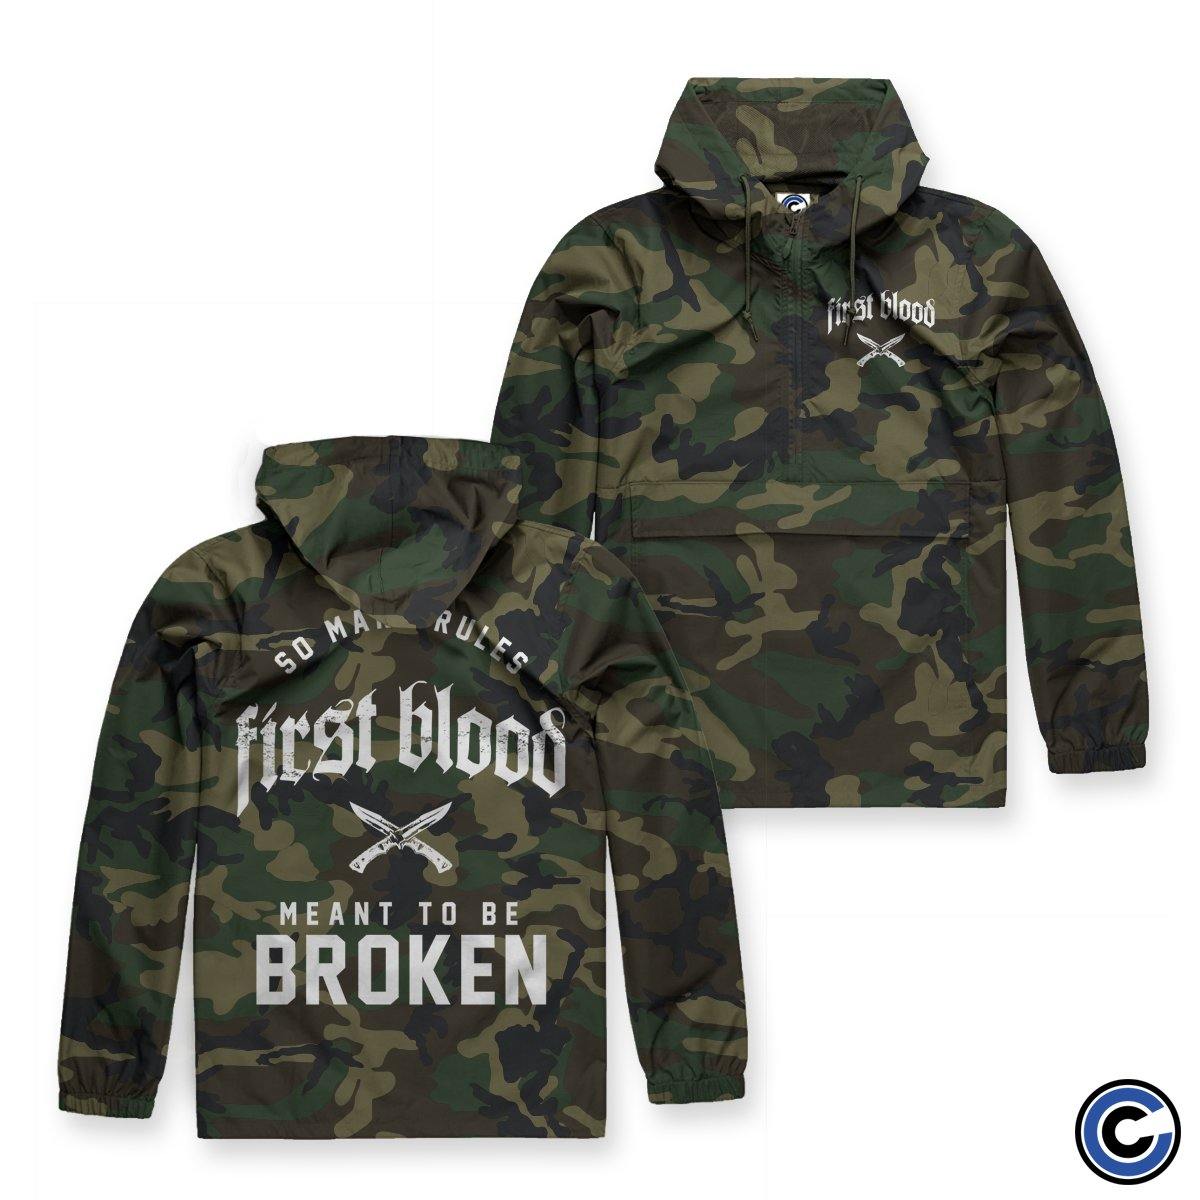 Buy – First Blood "Meant To Be Broken" Breaker – Band & Music Merch – Cold Cuts Merch